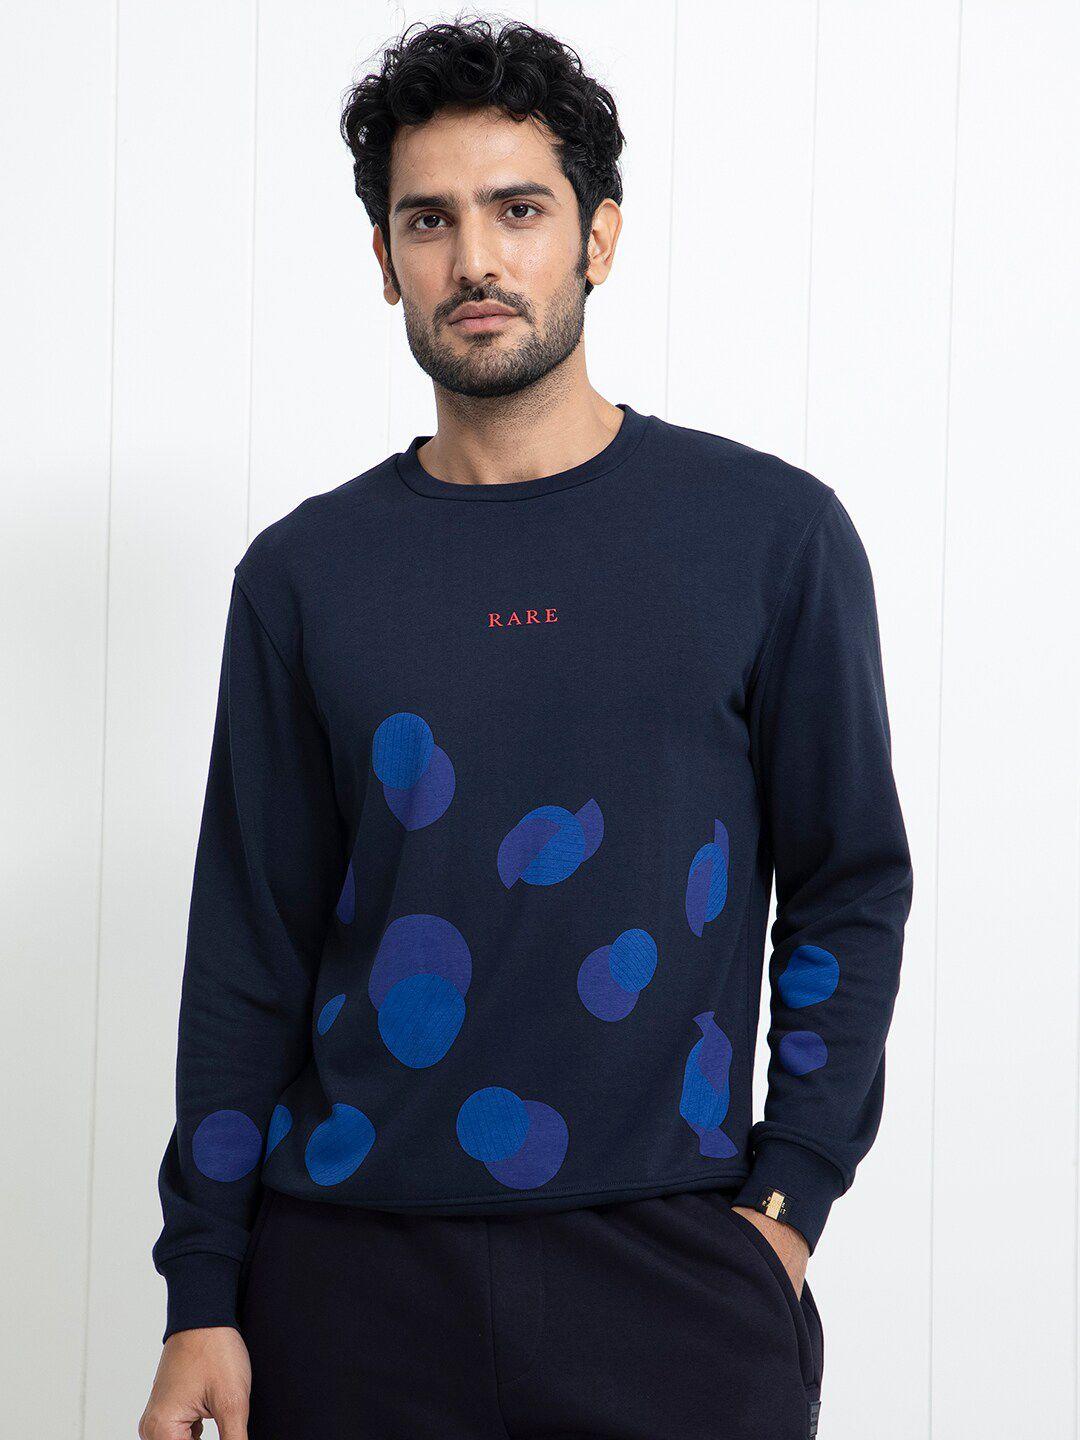 rare rabbit long sleeves graphic printed cotton pullover